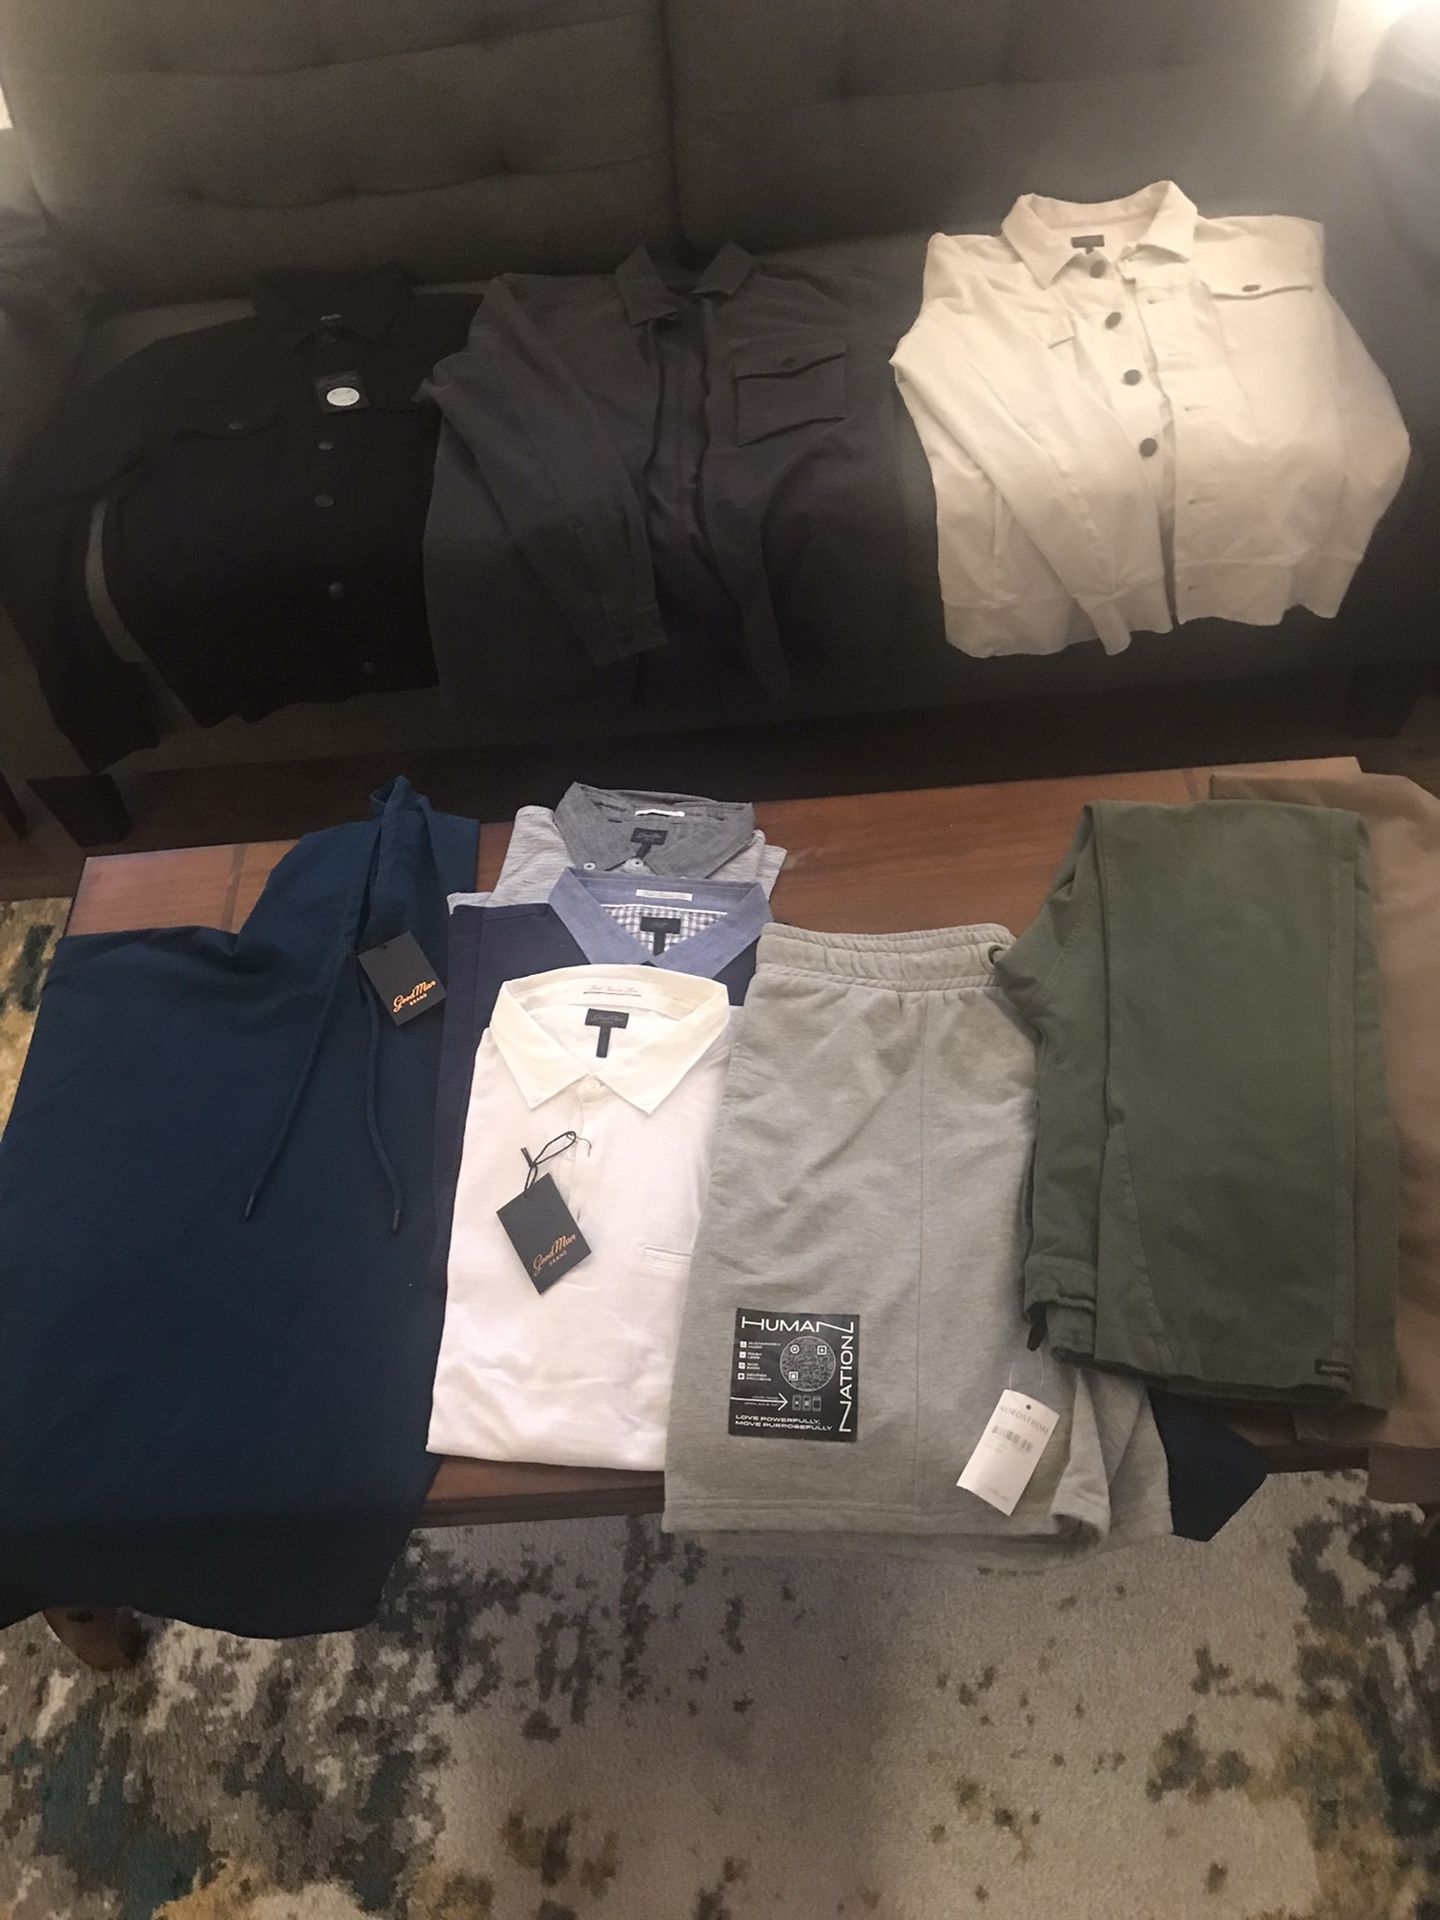 New* Goodman Brand Mens Polos, Chino’s, Jackets and T-shirts *bundle deals*